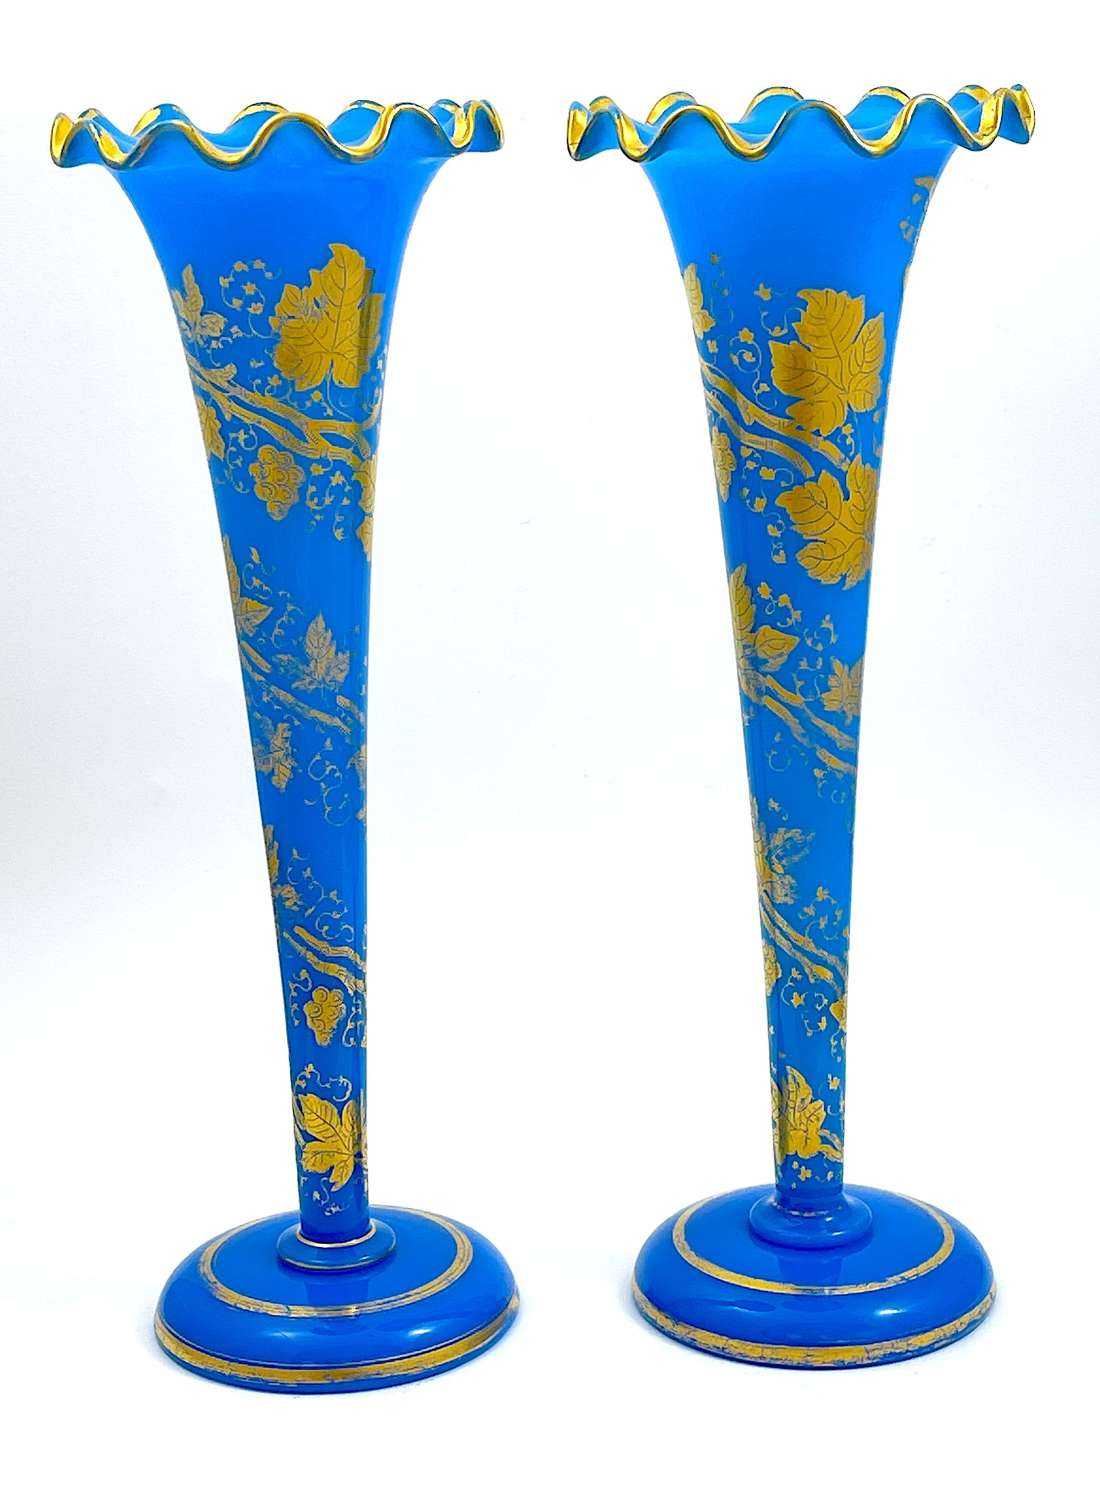 A Pair of High Quality Tall Baccarat Opaline Glass Trumpet-Shaped Vase